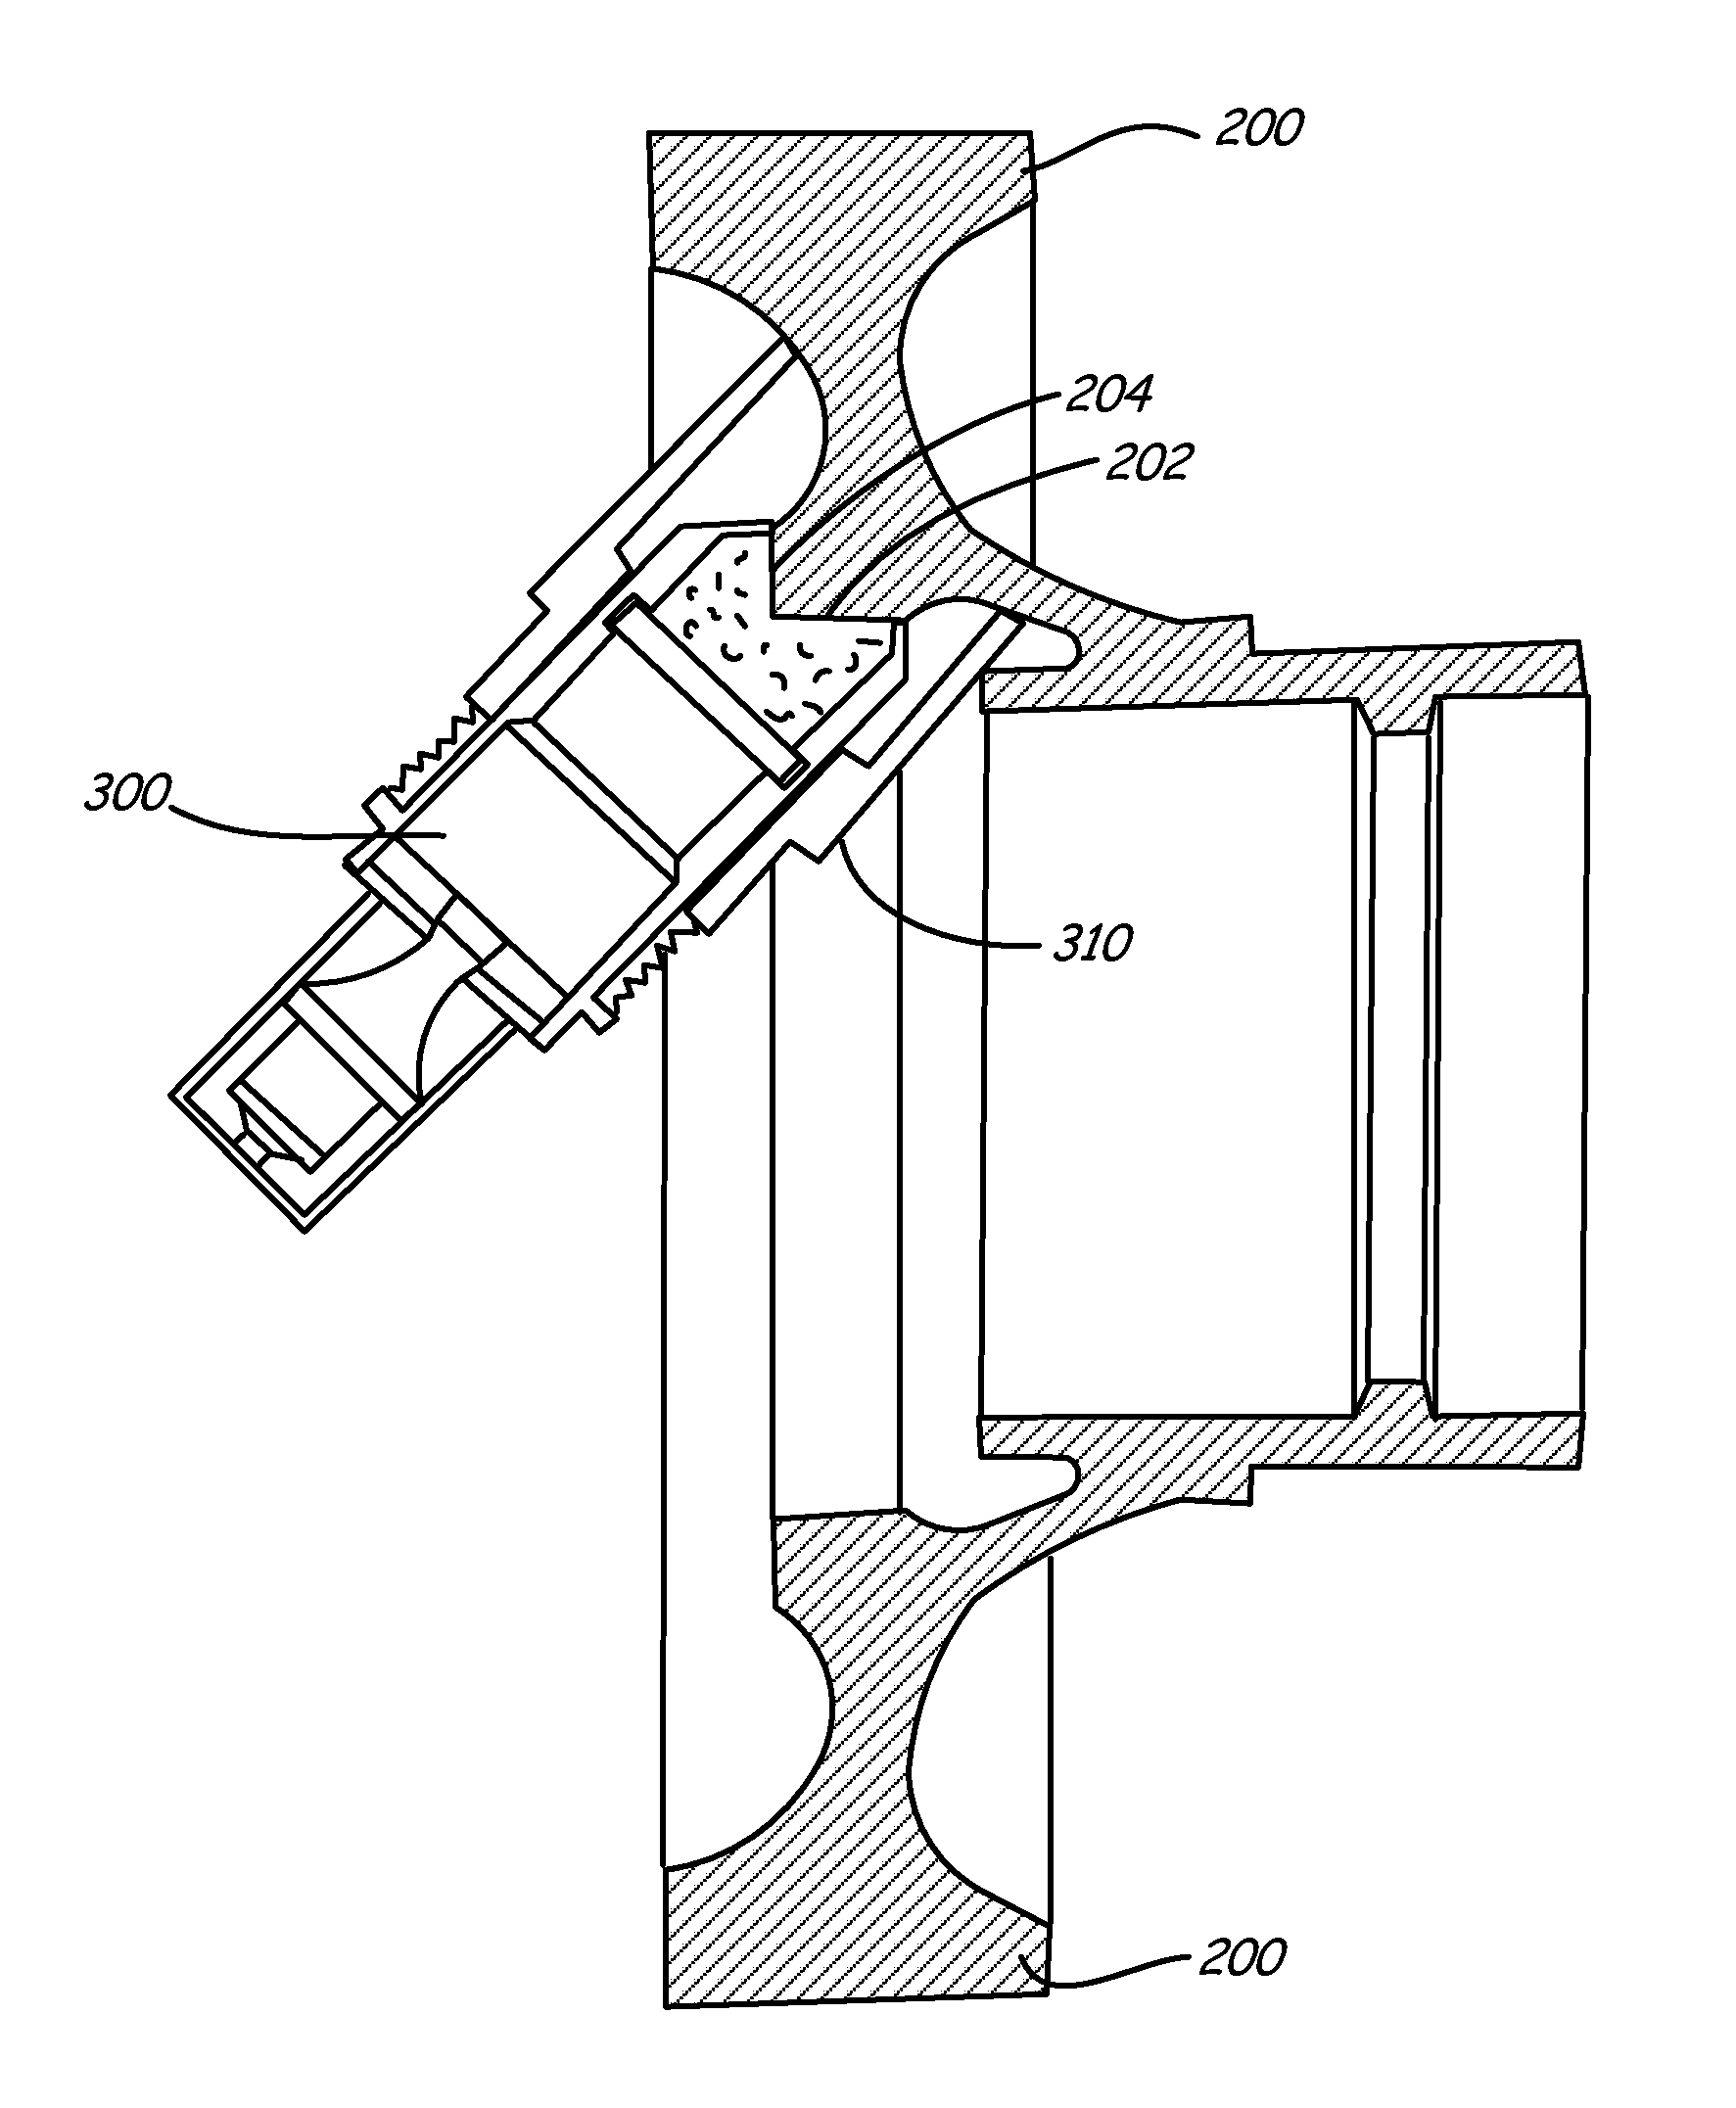 Method for ultrasonic peening of gas turbine engine components without engine disassembly